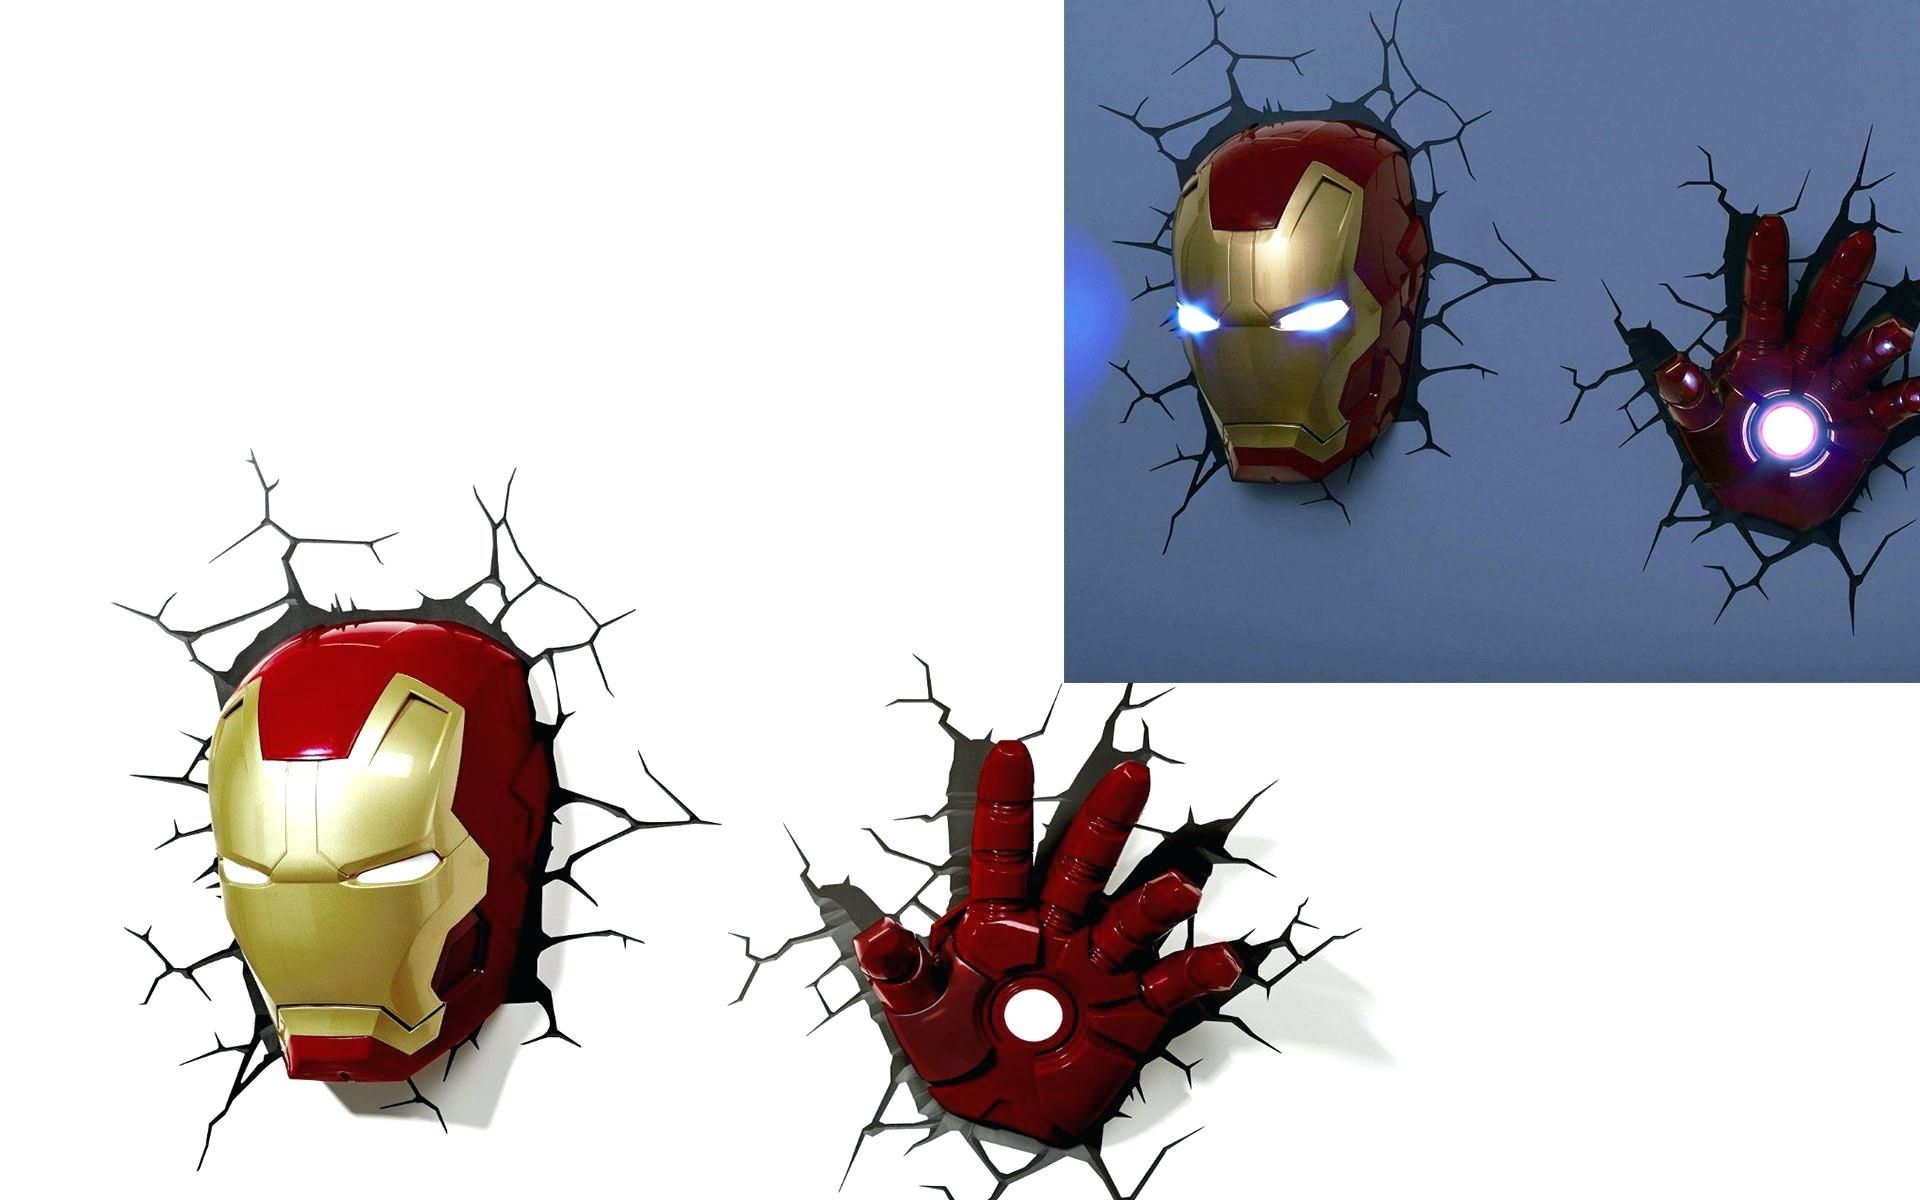 3d Wall Lights Night Paper 3d Wall Art Nightlight Spiderman Face Within Most Up To Date The Avengers 3d Wall Art Nightlight (View 10 of 15)